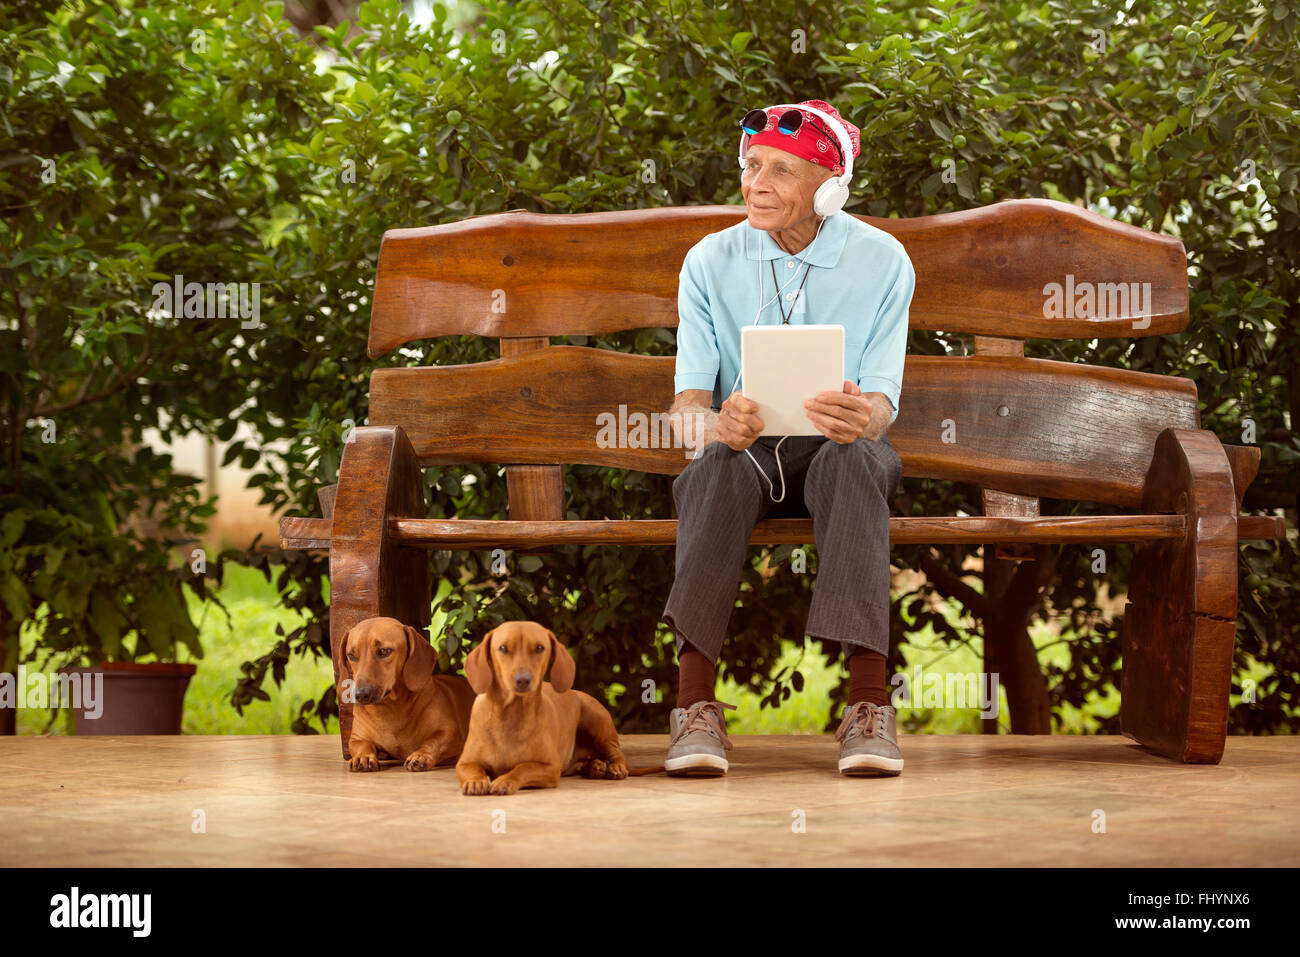 MODEL RELEASED. Senior man sitting on a bench listening to music with his dogs. Stock Photo